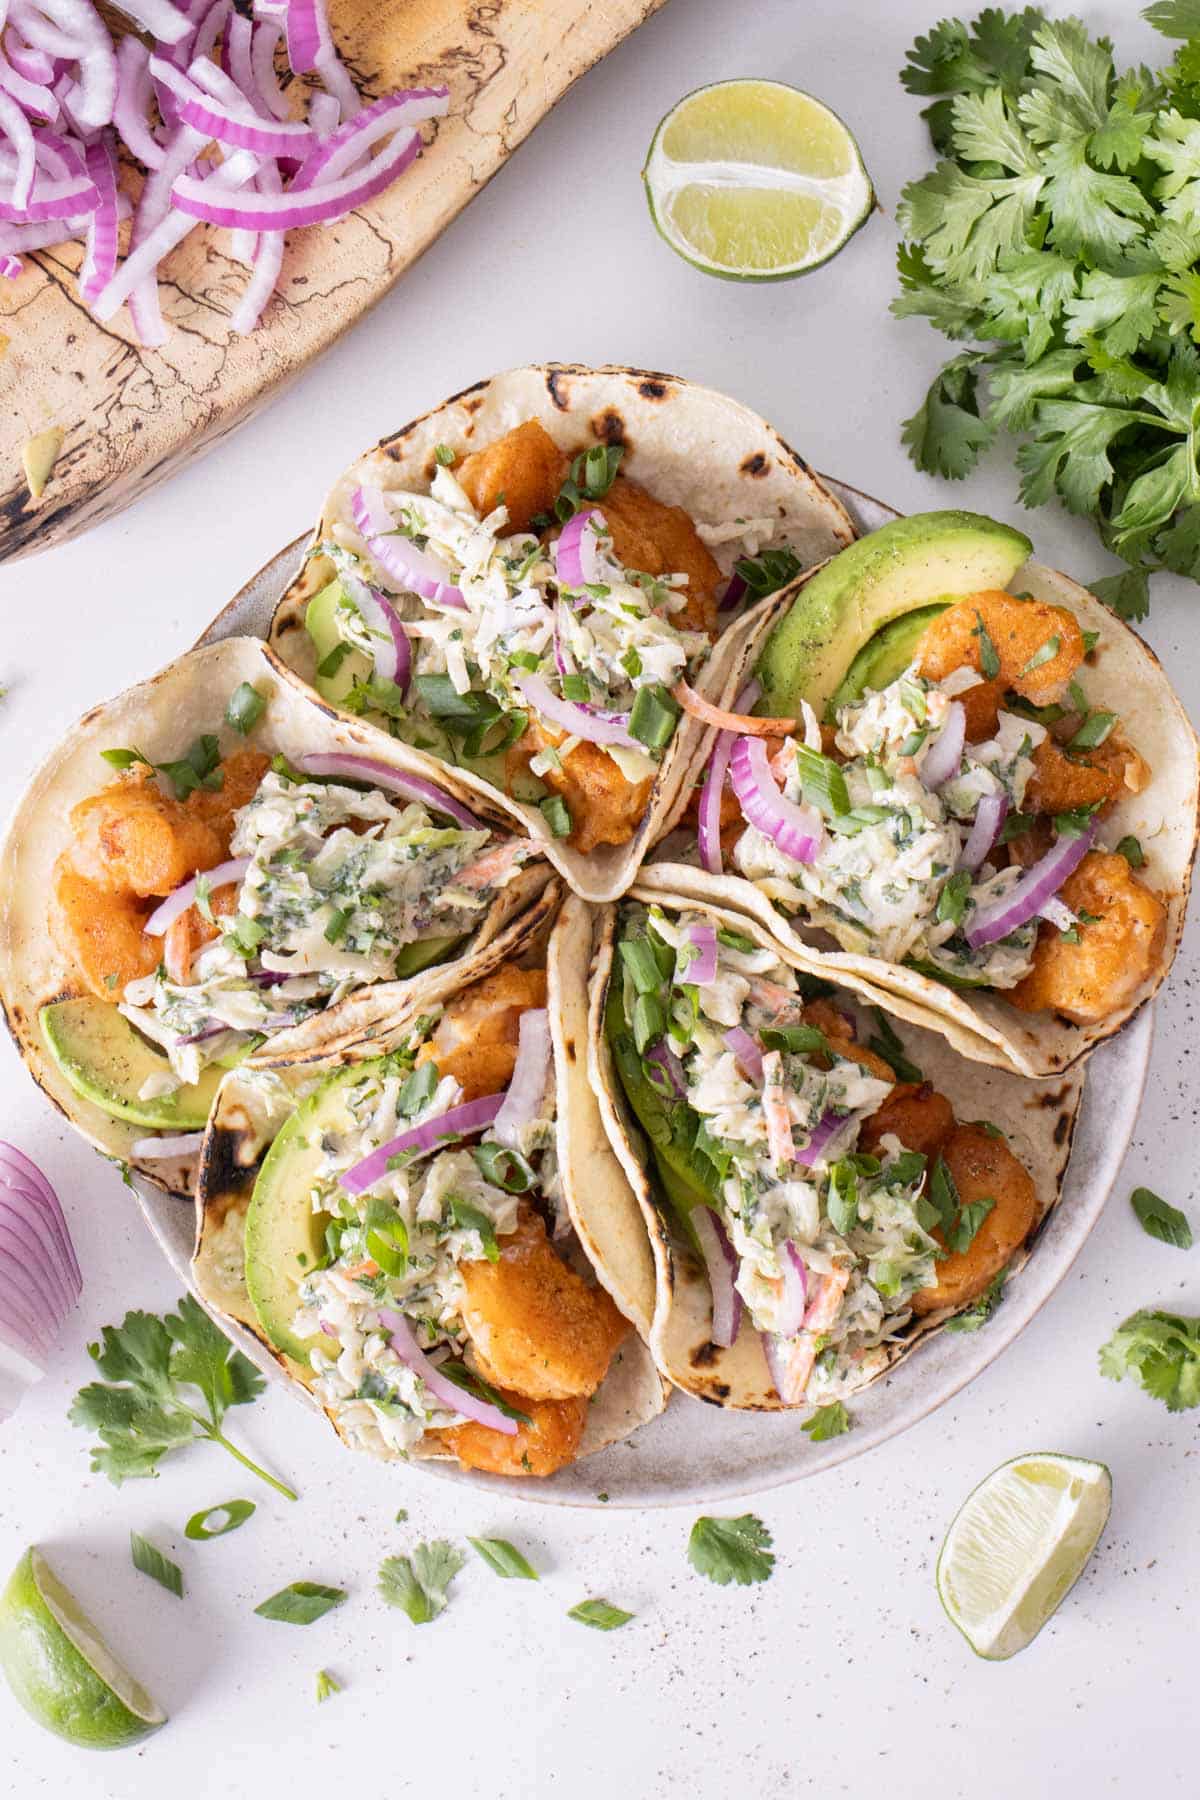 A plate of Baja shrimp tacos with cilantro, limes, and red onion.